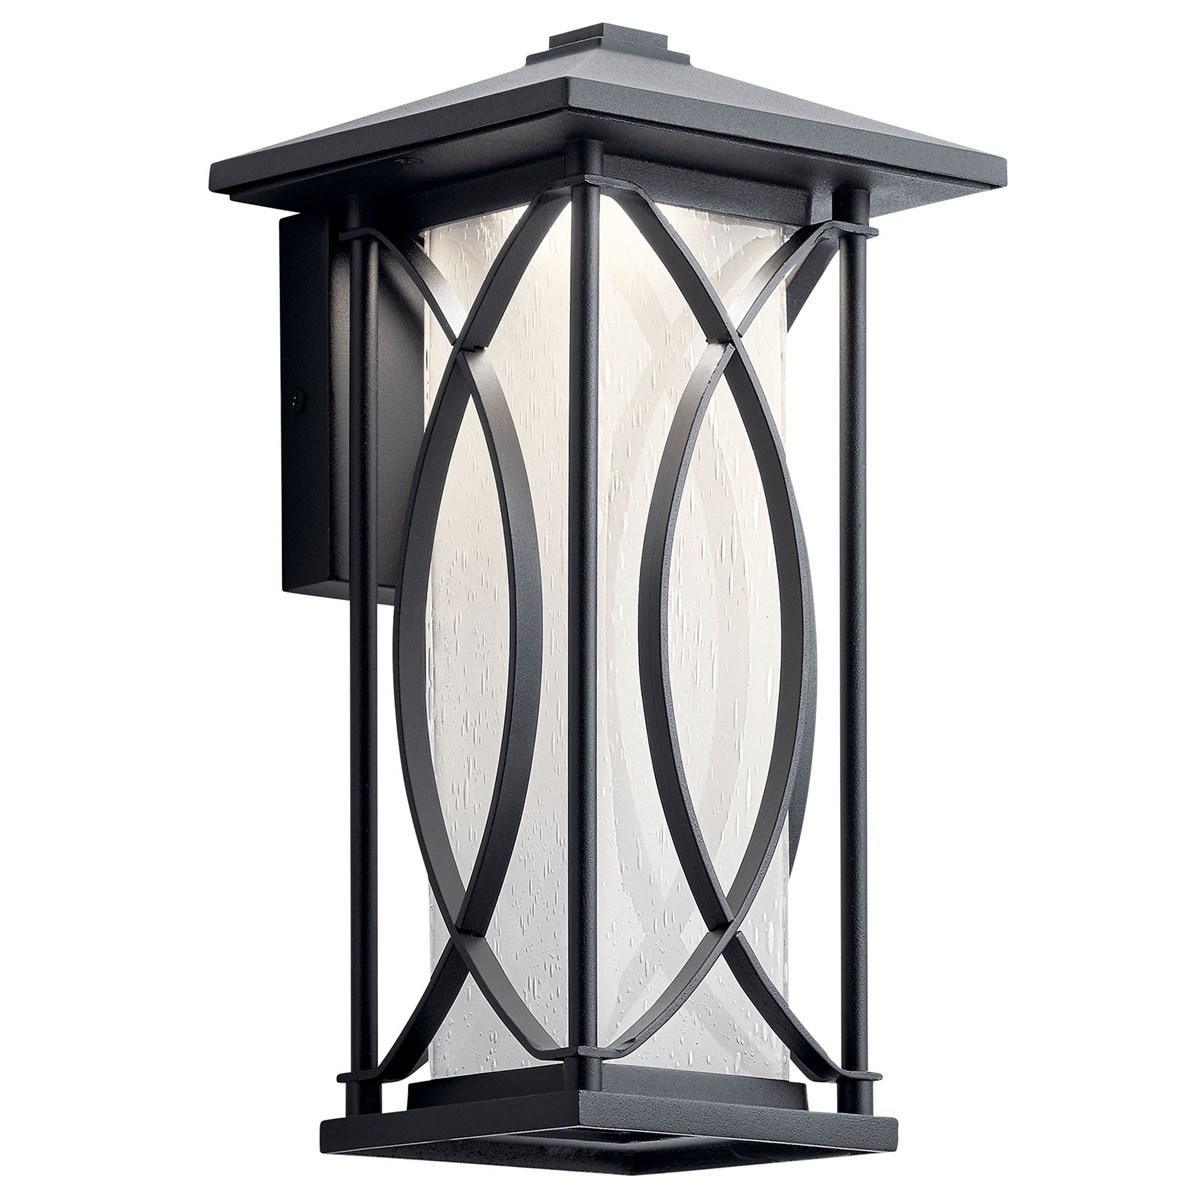 Ashbern 13 in. LED Outdoor Wall Sconce 300 Lumens 3000K Black Finish